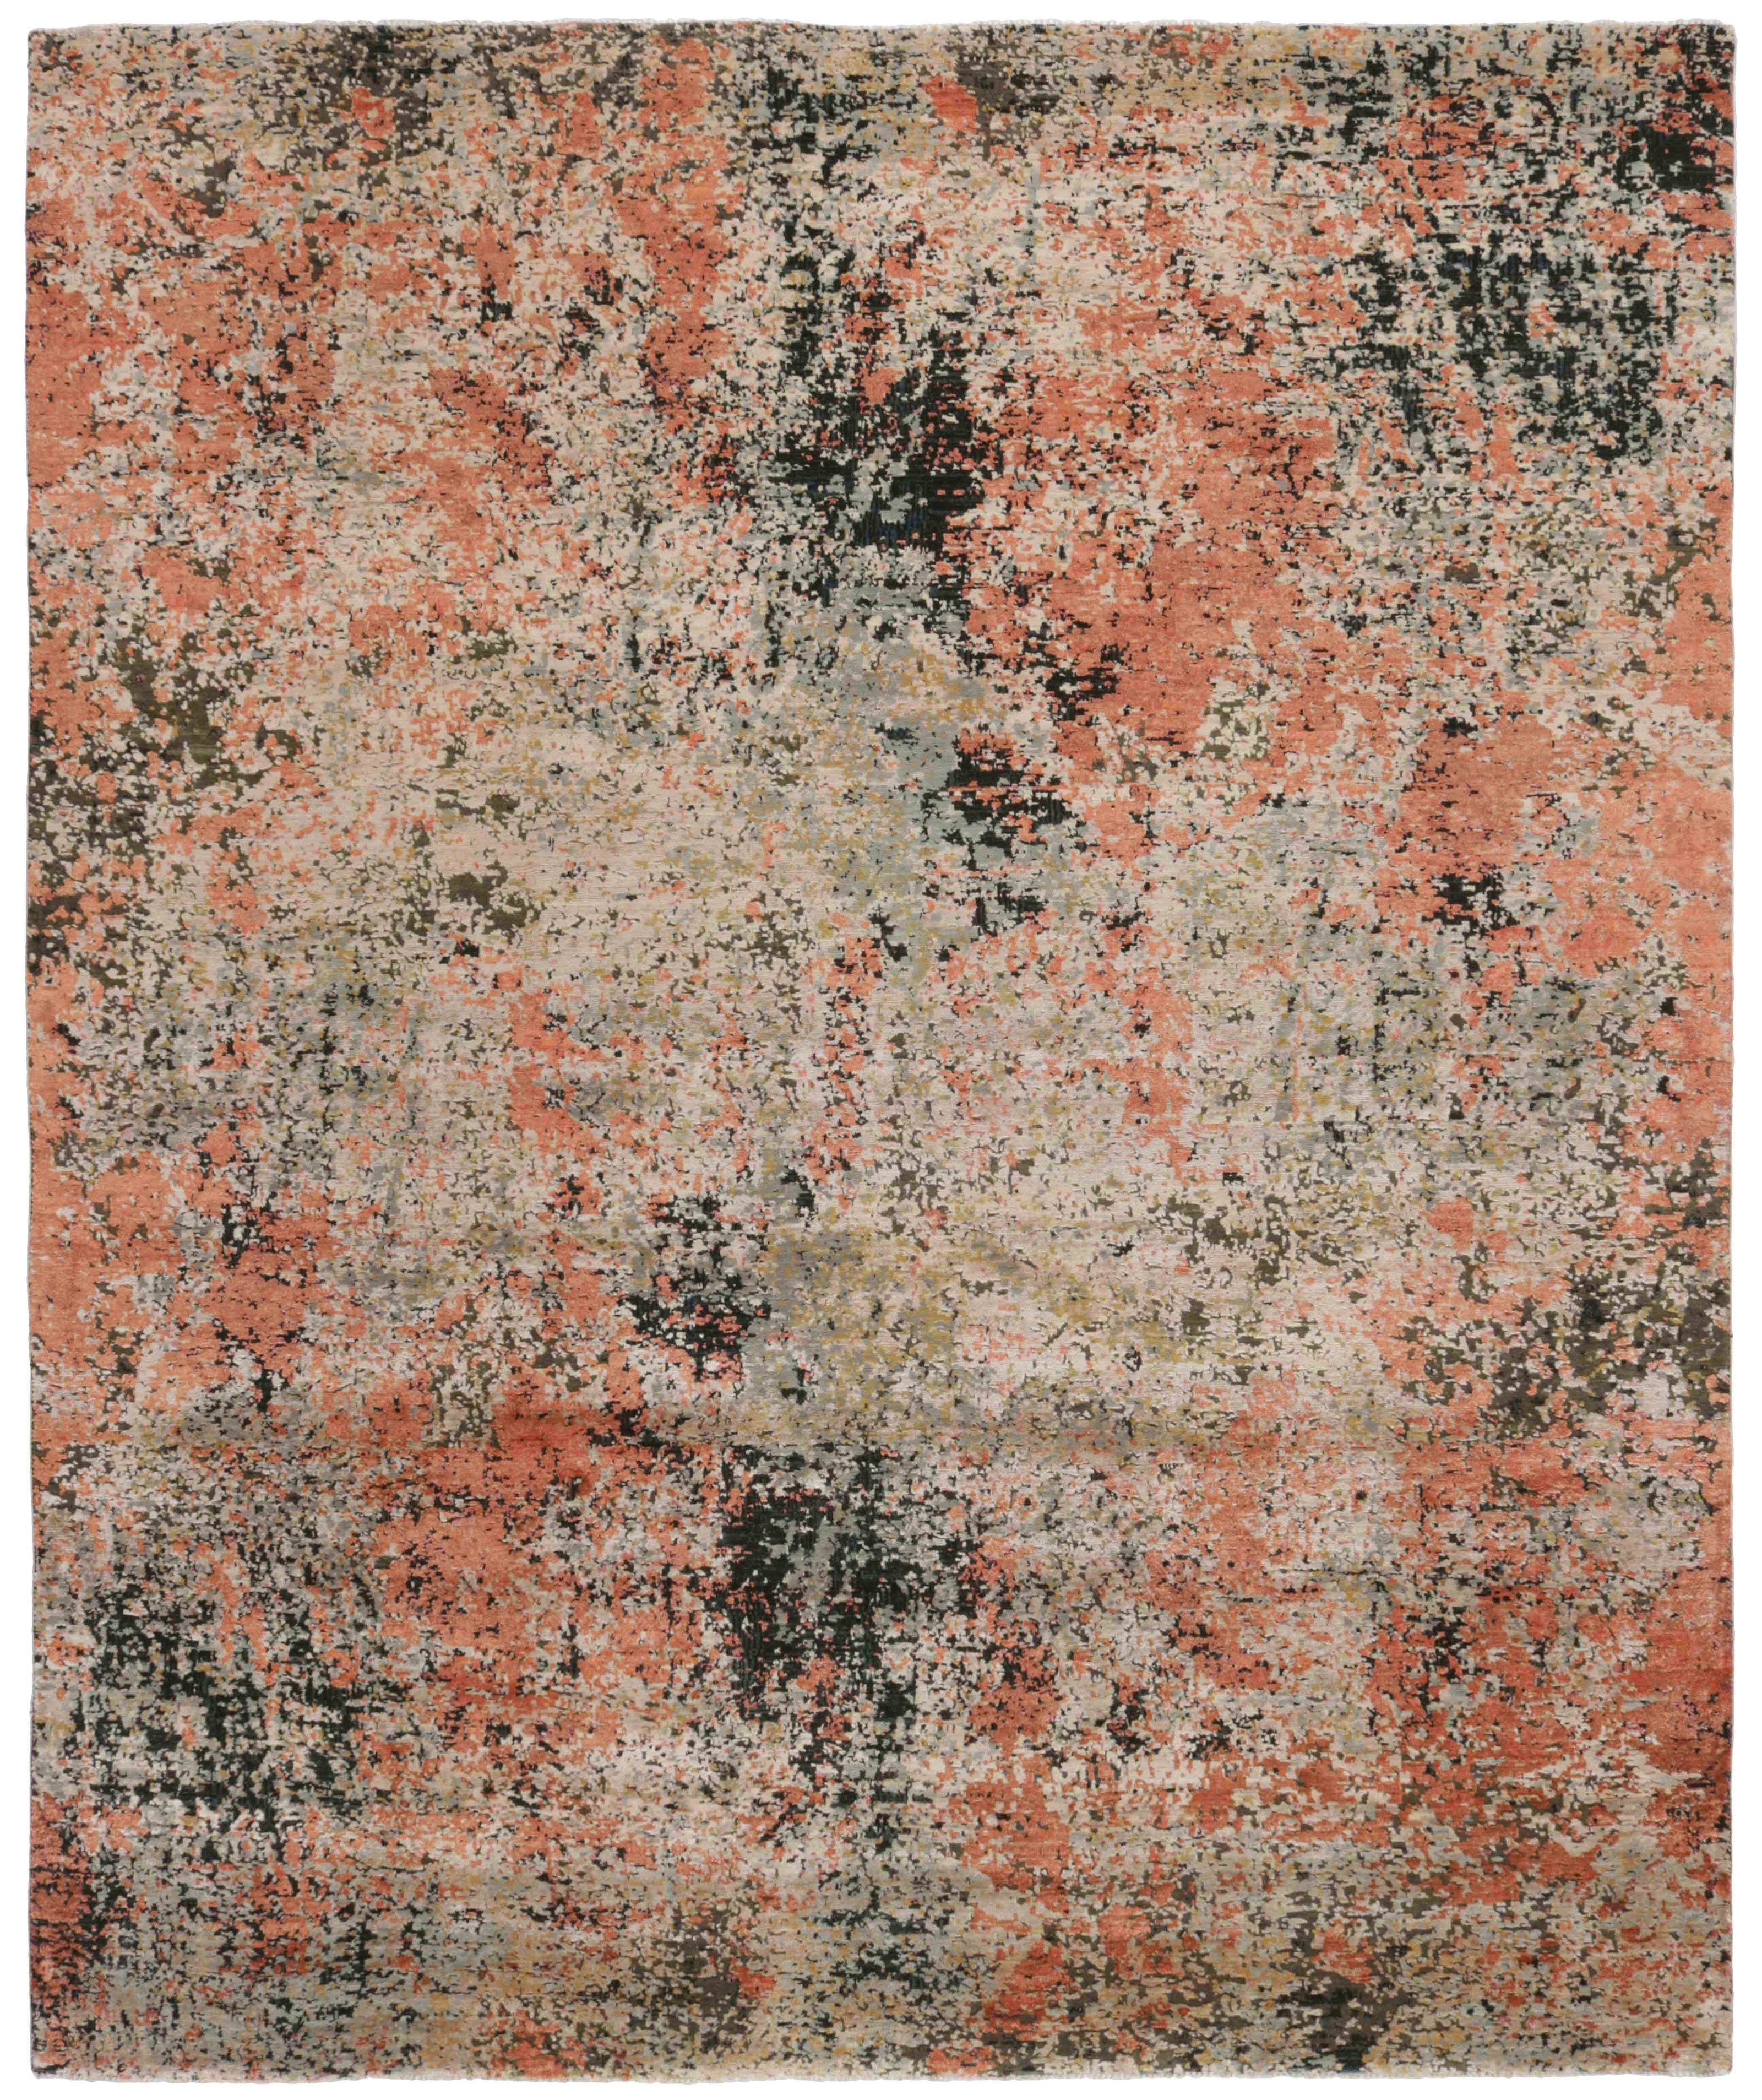 Large area rug with abstract design in grey